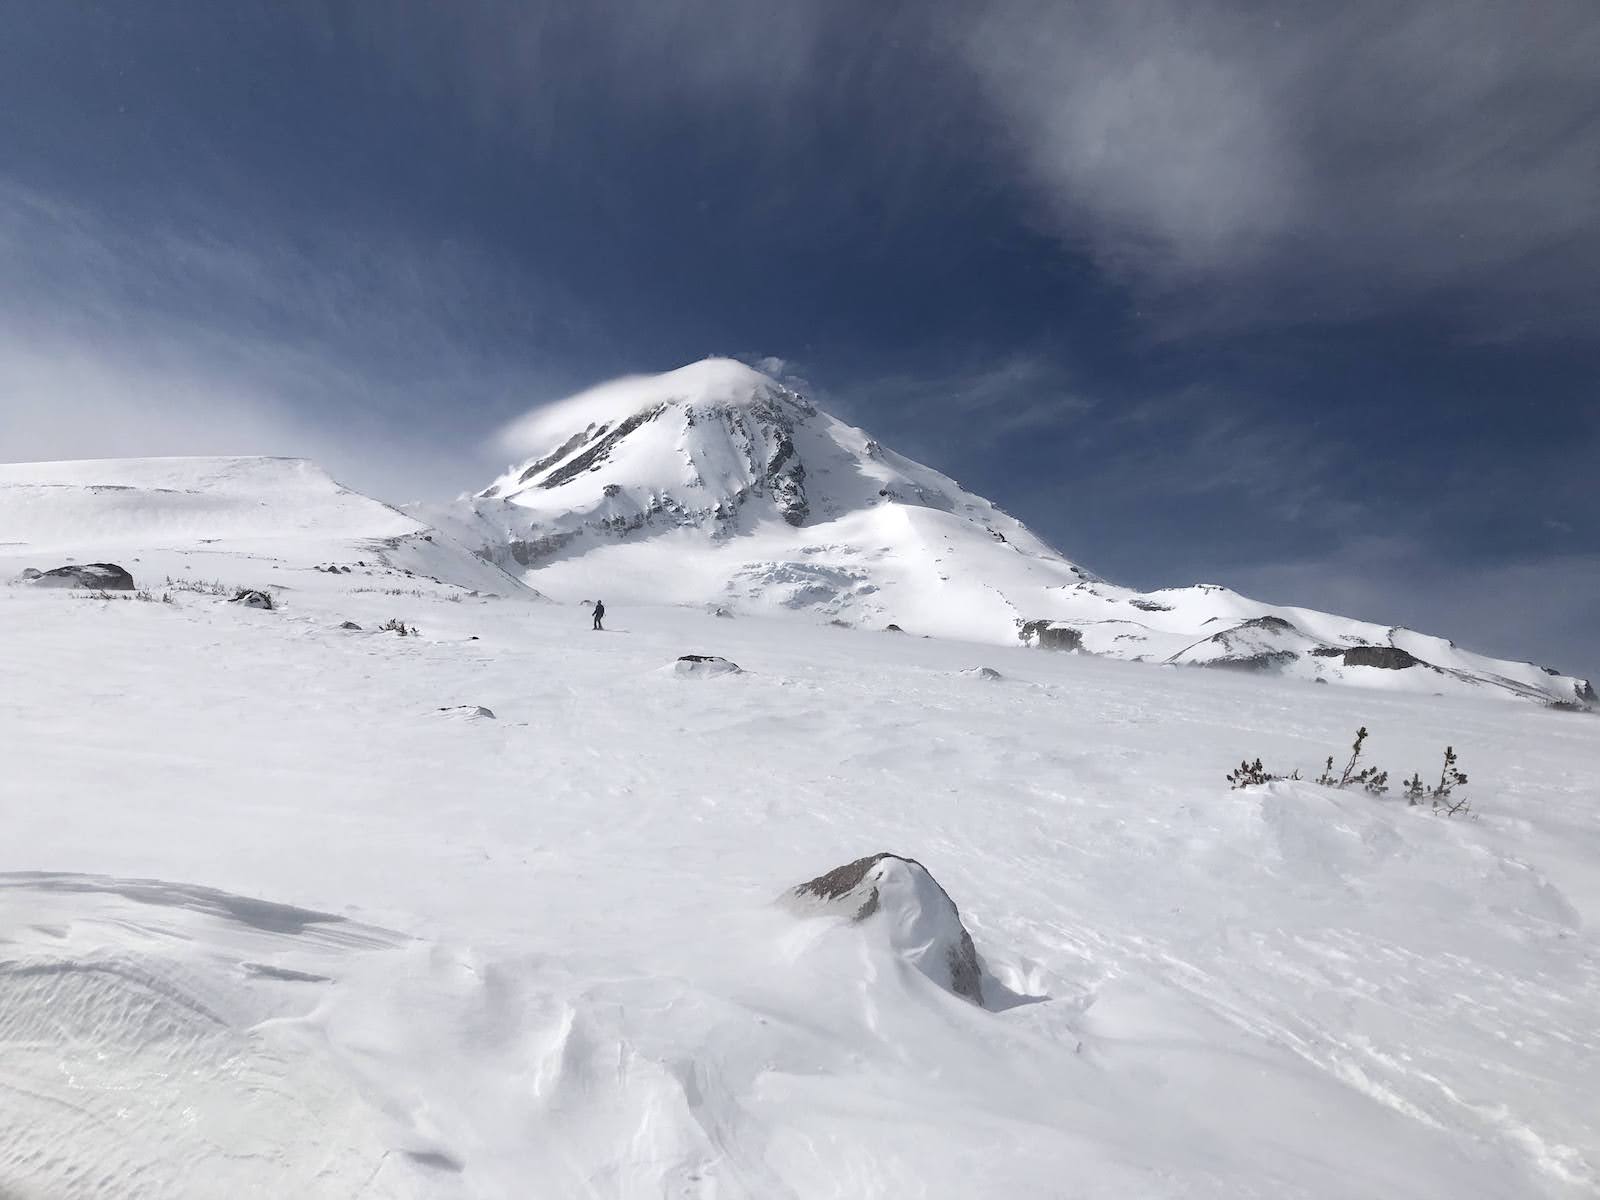 a view of Mt Hood from the Cooper Spur Shelter; a skiier descends towards the shelter on a windy snow field